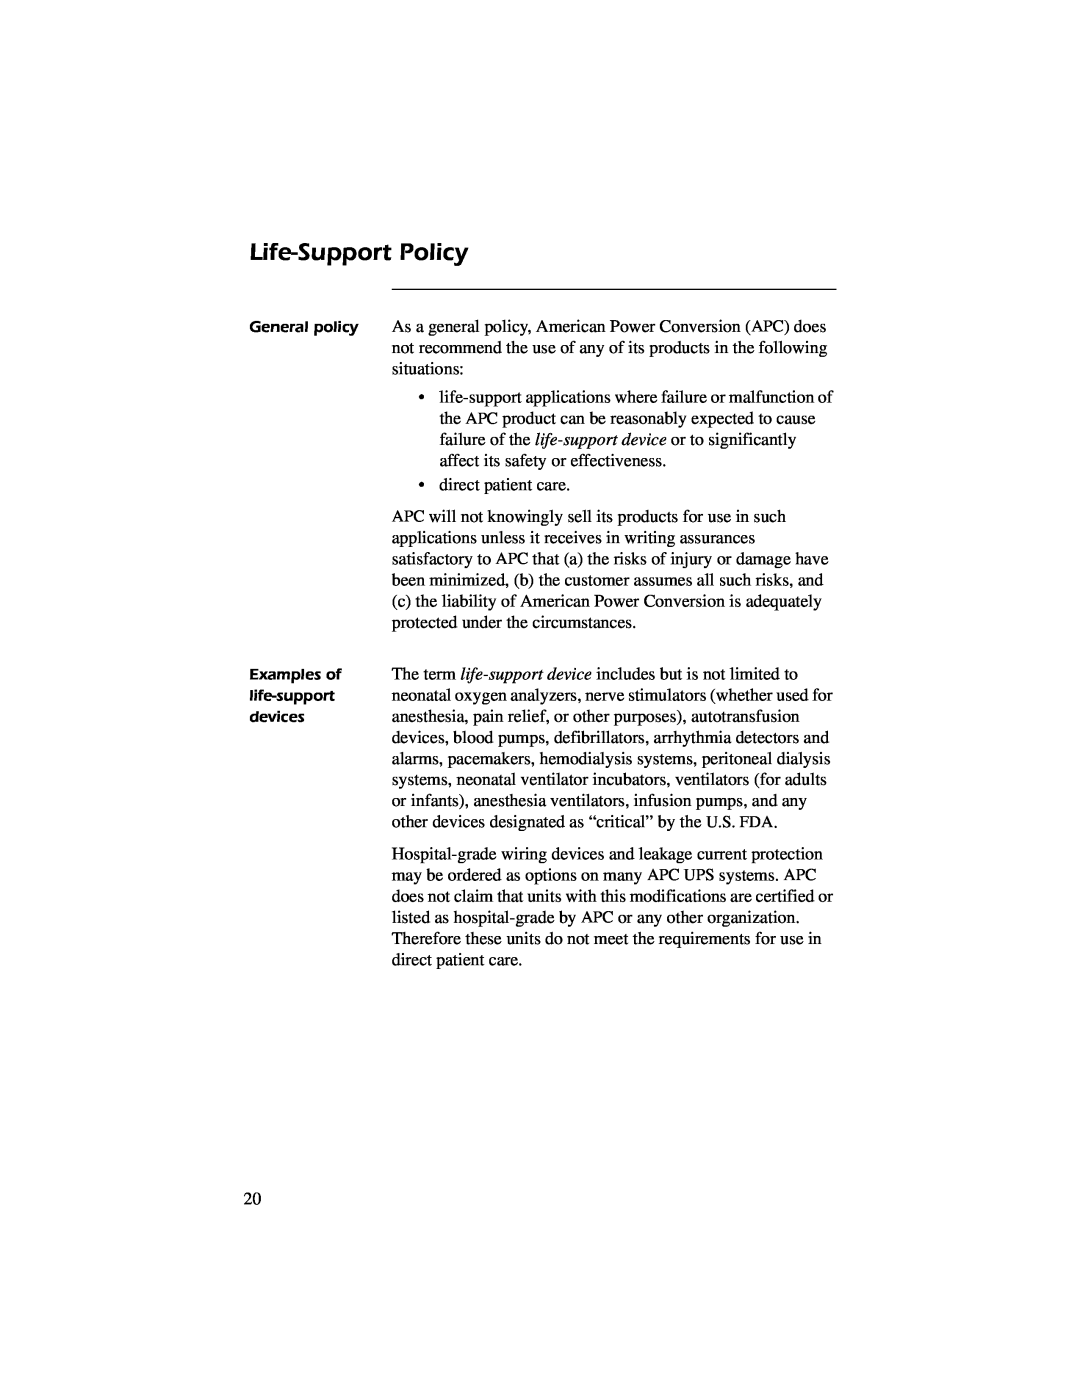 American Power Conversion AP9312TH Life-Support Policy, General policy, Examples of, life-support, devices 